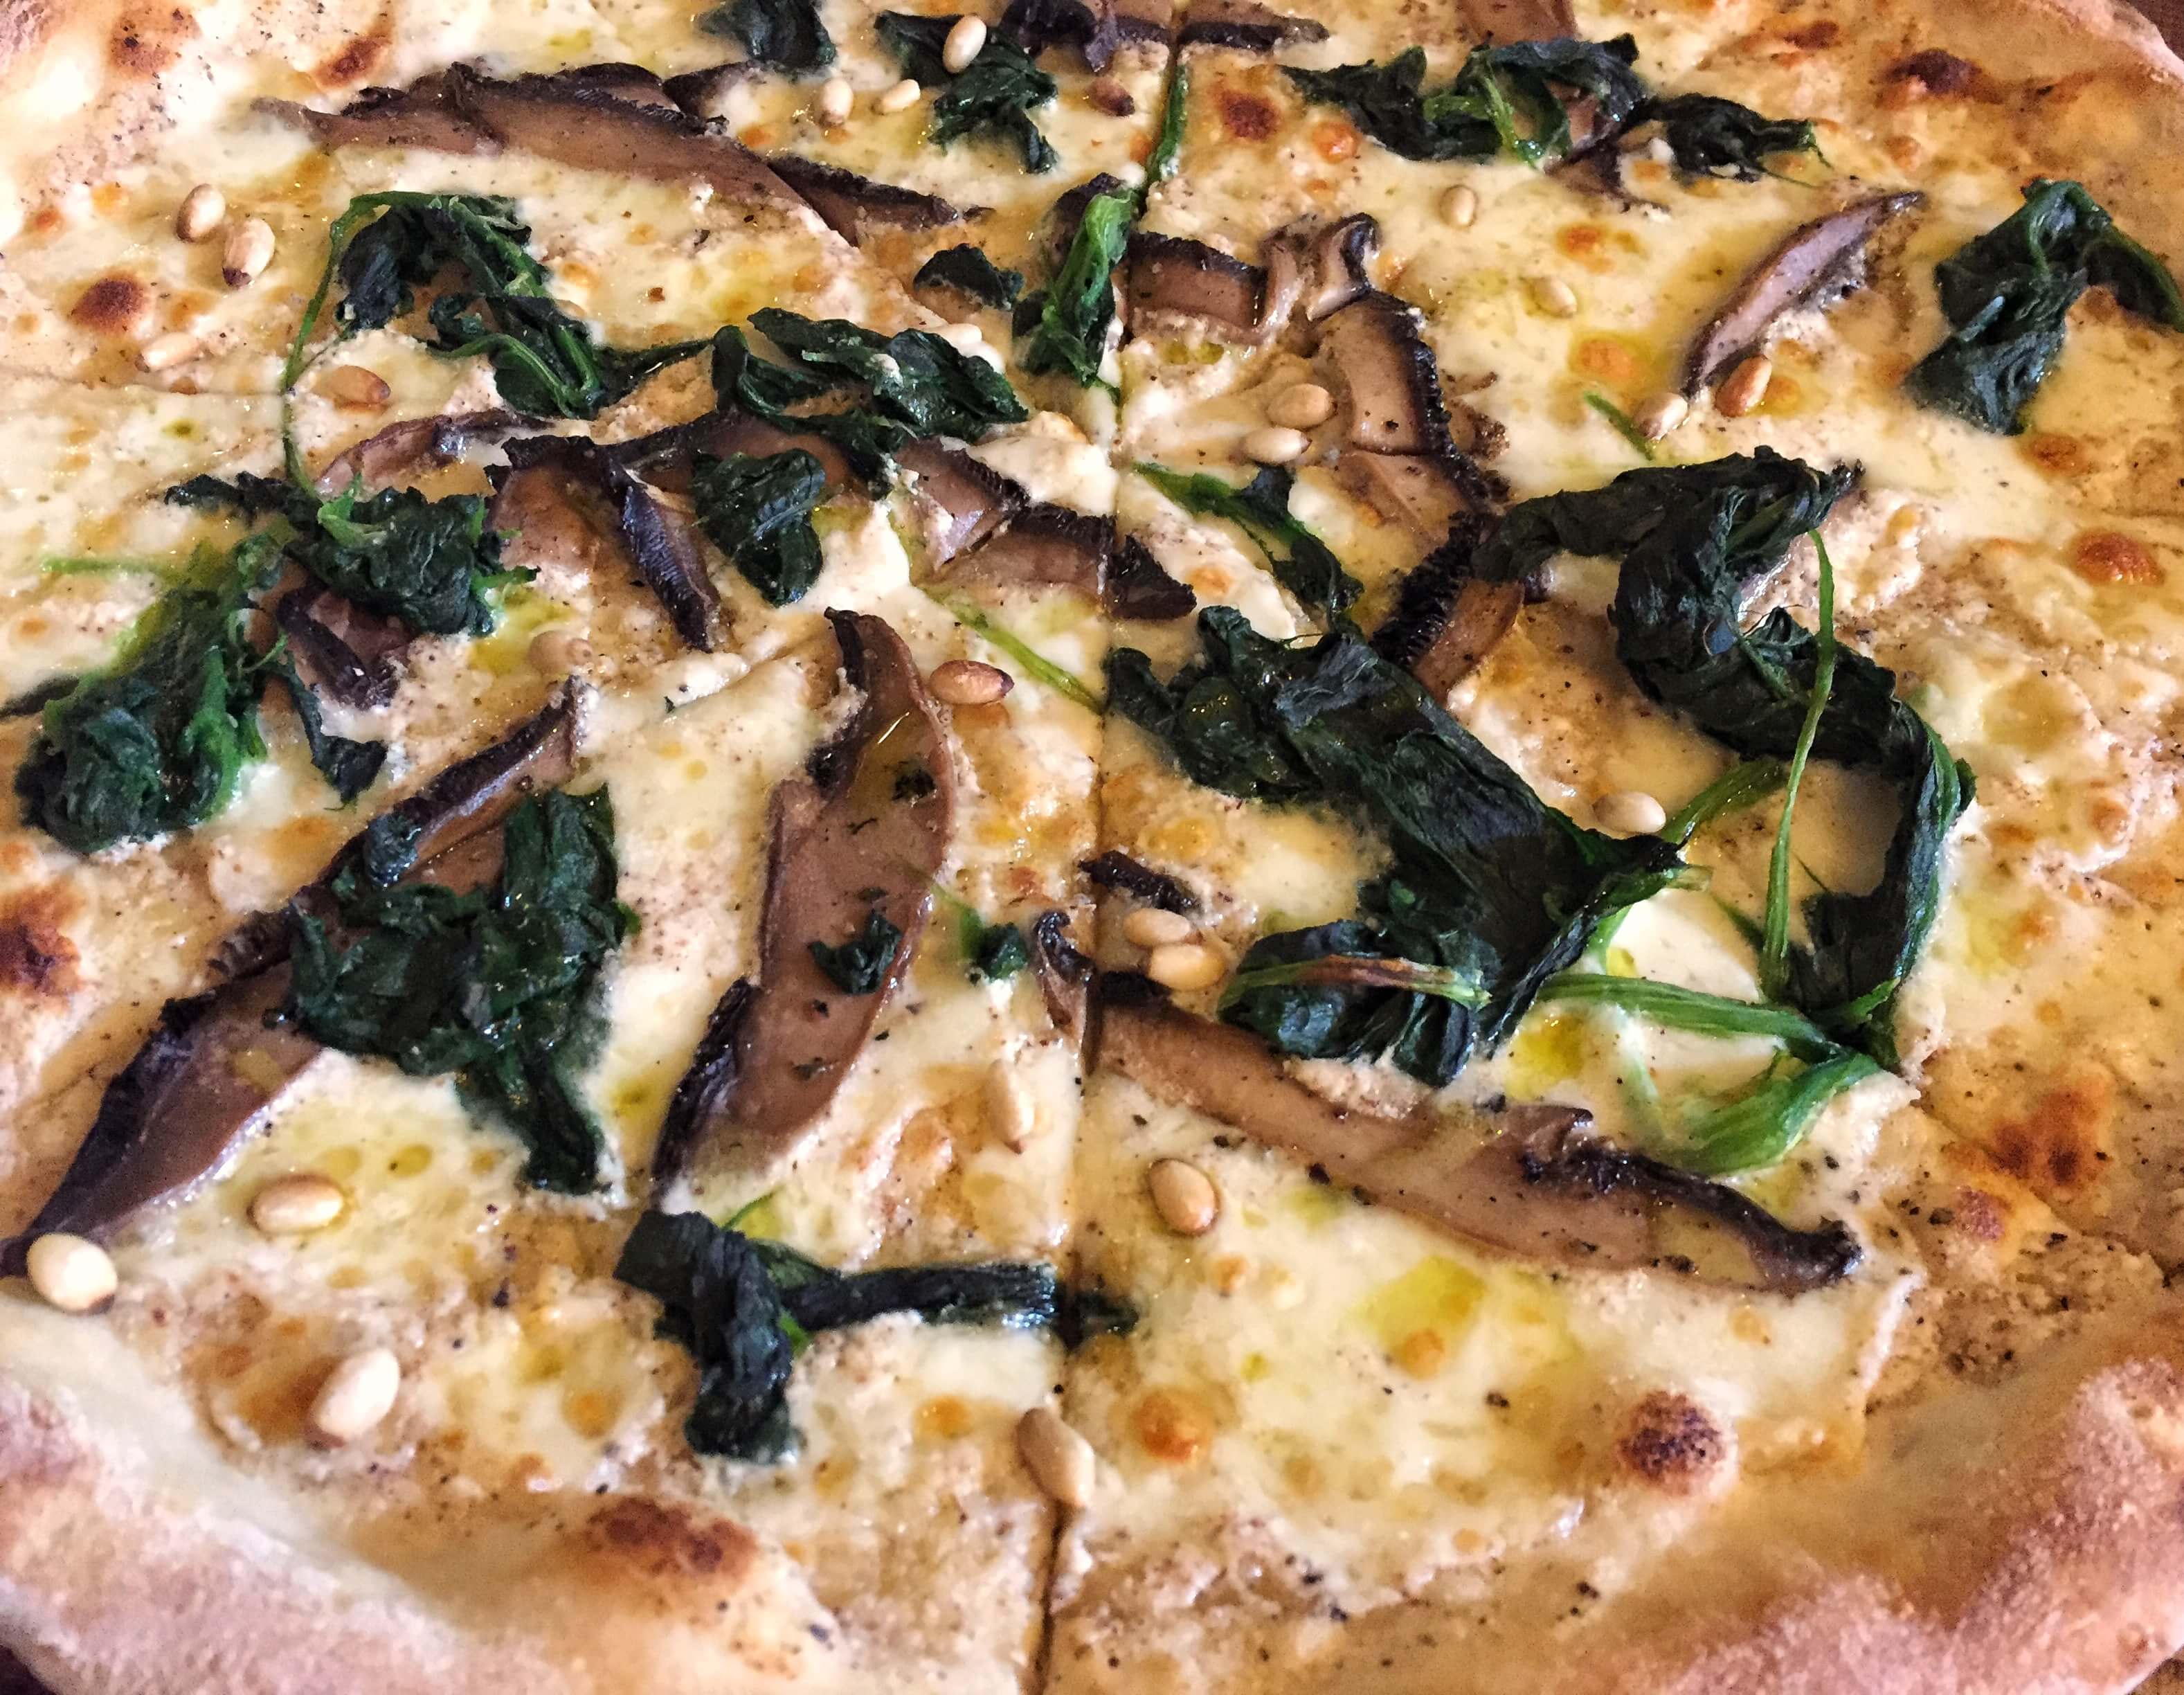 Pizza with Portobello mushrooms, spinach, pine nuts and truffle oil at The Coach and Horses, Clapham, London